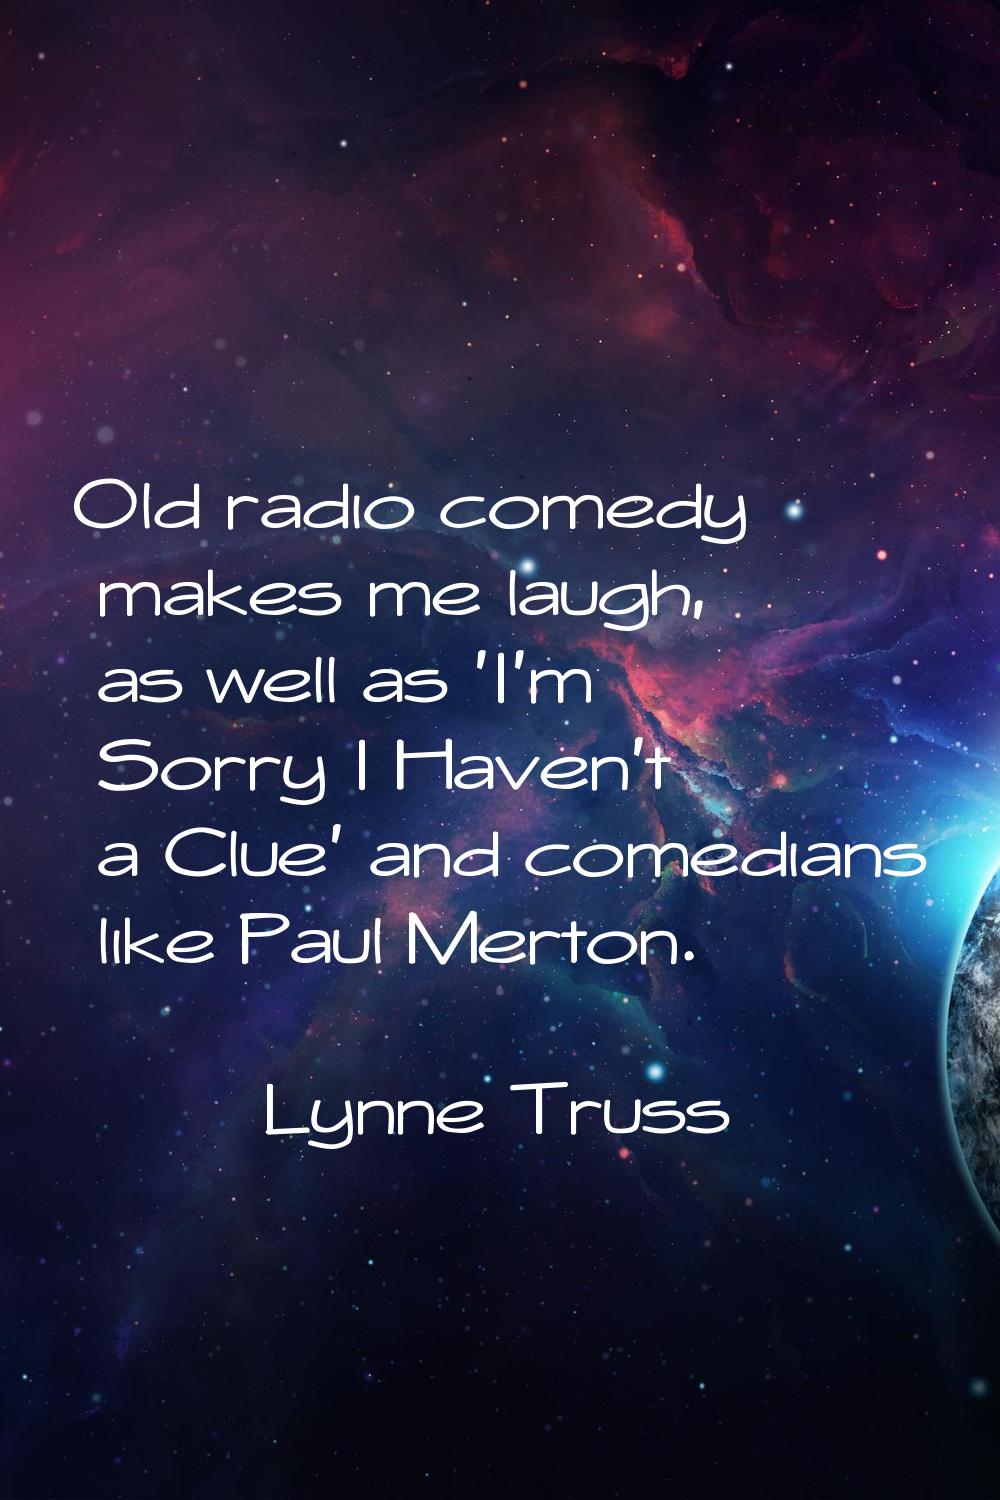 Old radio comedy makes me laugh, as well as 'I'm Sorry I Haven't a Clue' and comedians like Paul Me